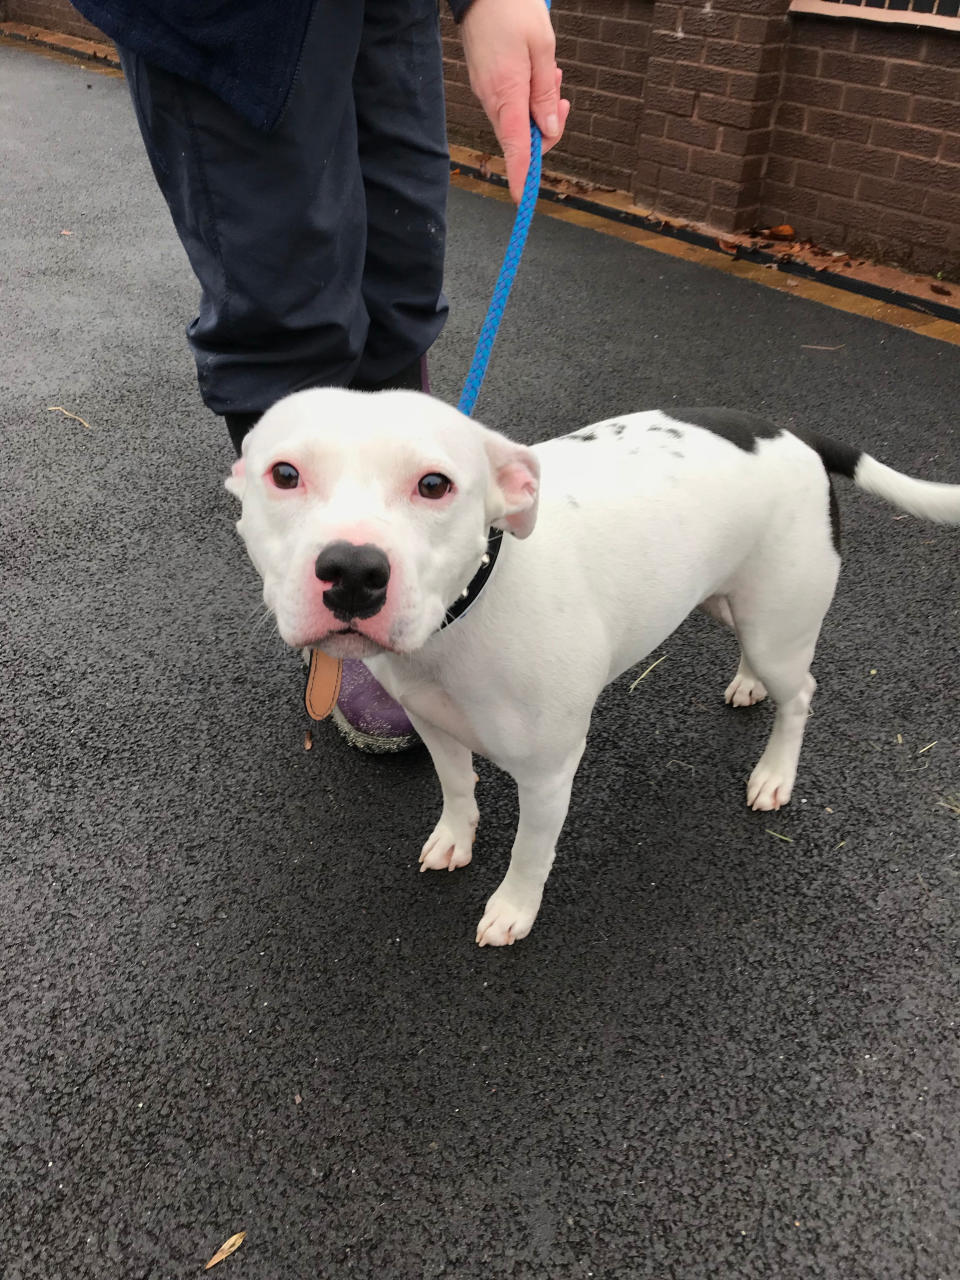 A Staffordshire bull terrier, who has been named Snoop, that was abandoned at the side of the road in Trentham, Stoke-on-Trent. Source: RSPCA